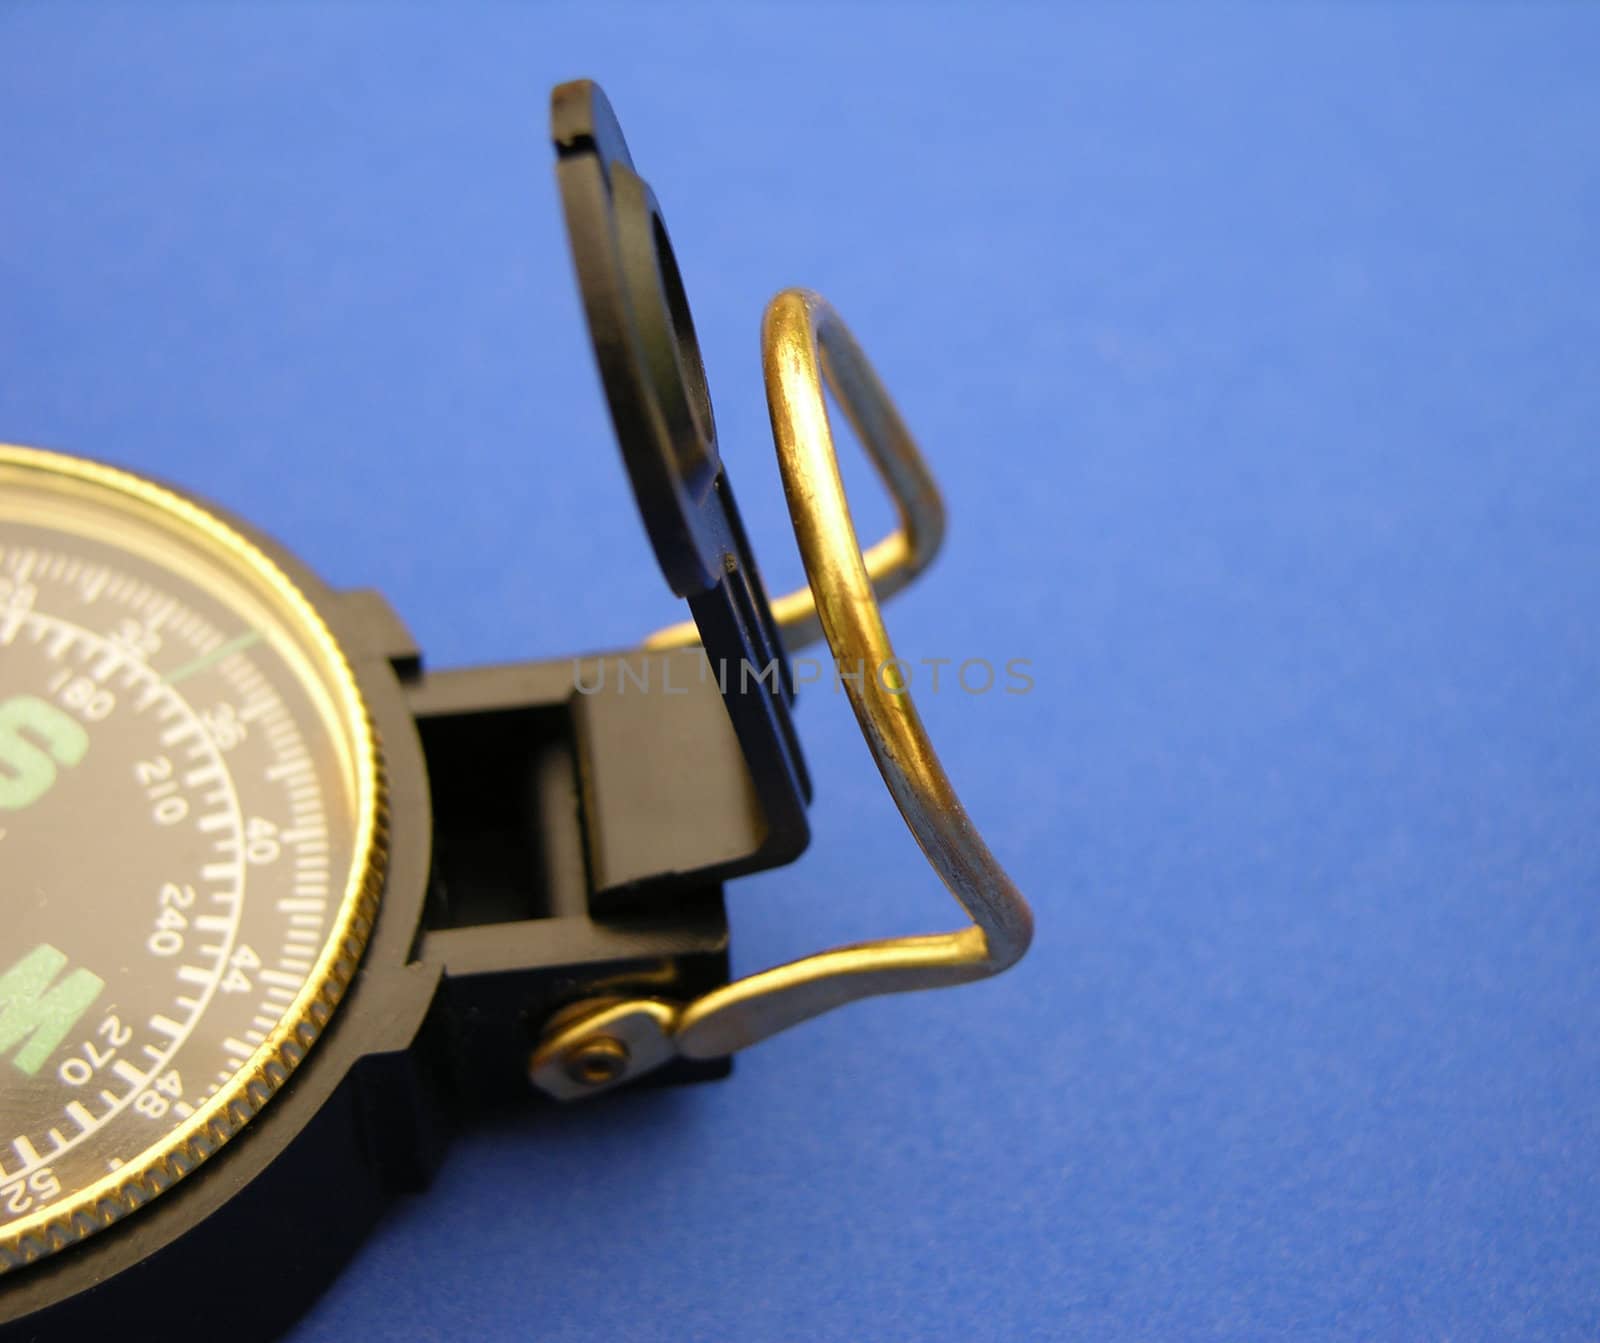           Closeup view of a compass on a blue background